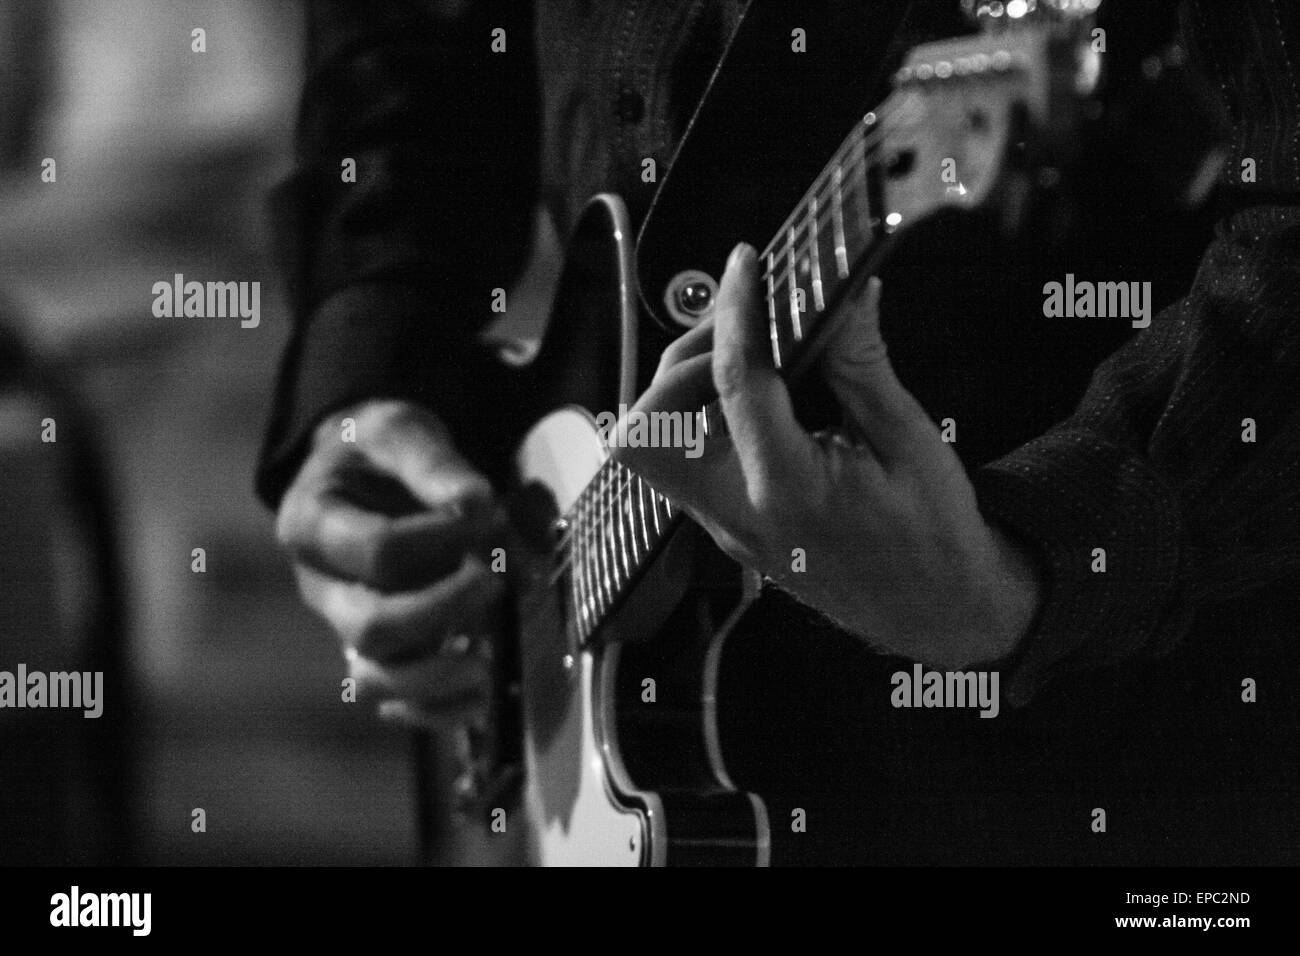 Guitar player performing with Fender Telecaster guitar in black & white - detail on guitar neck and hands with no face Stock Photo